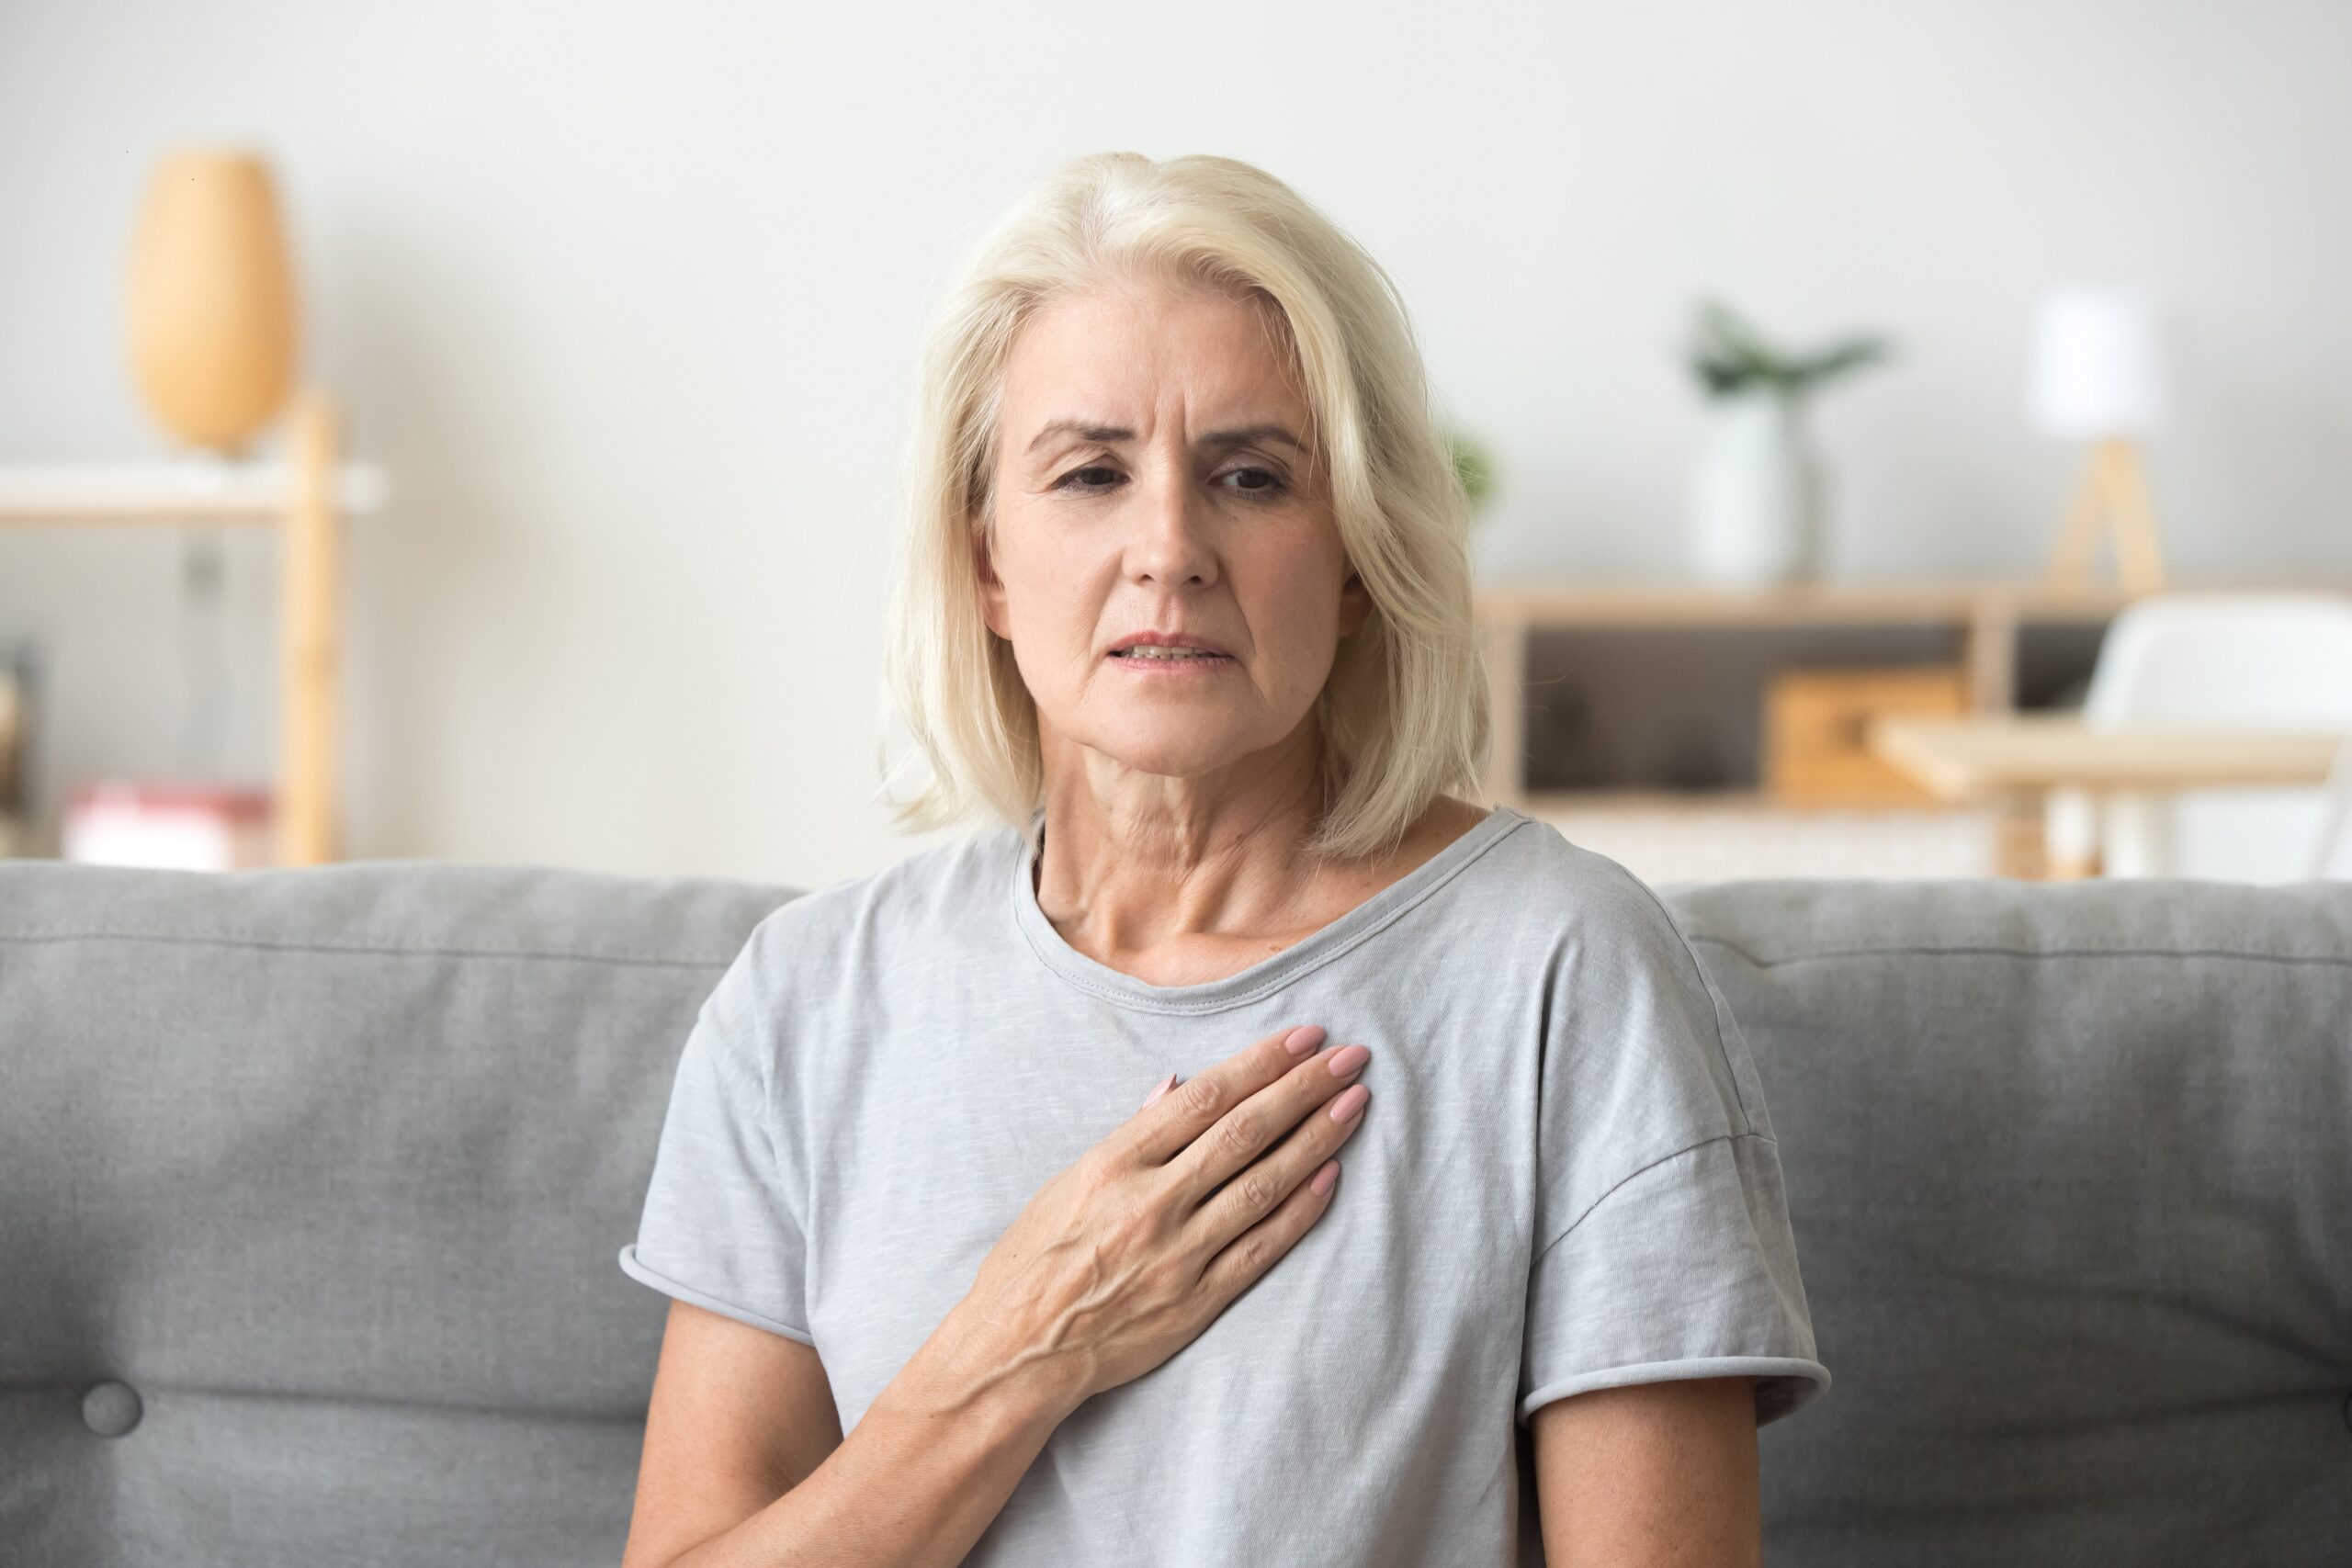 Increased risk of heart attack: Recognize these symptoms early